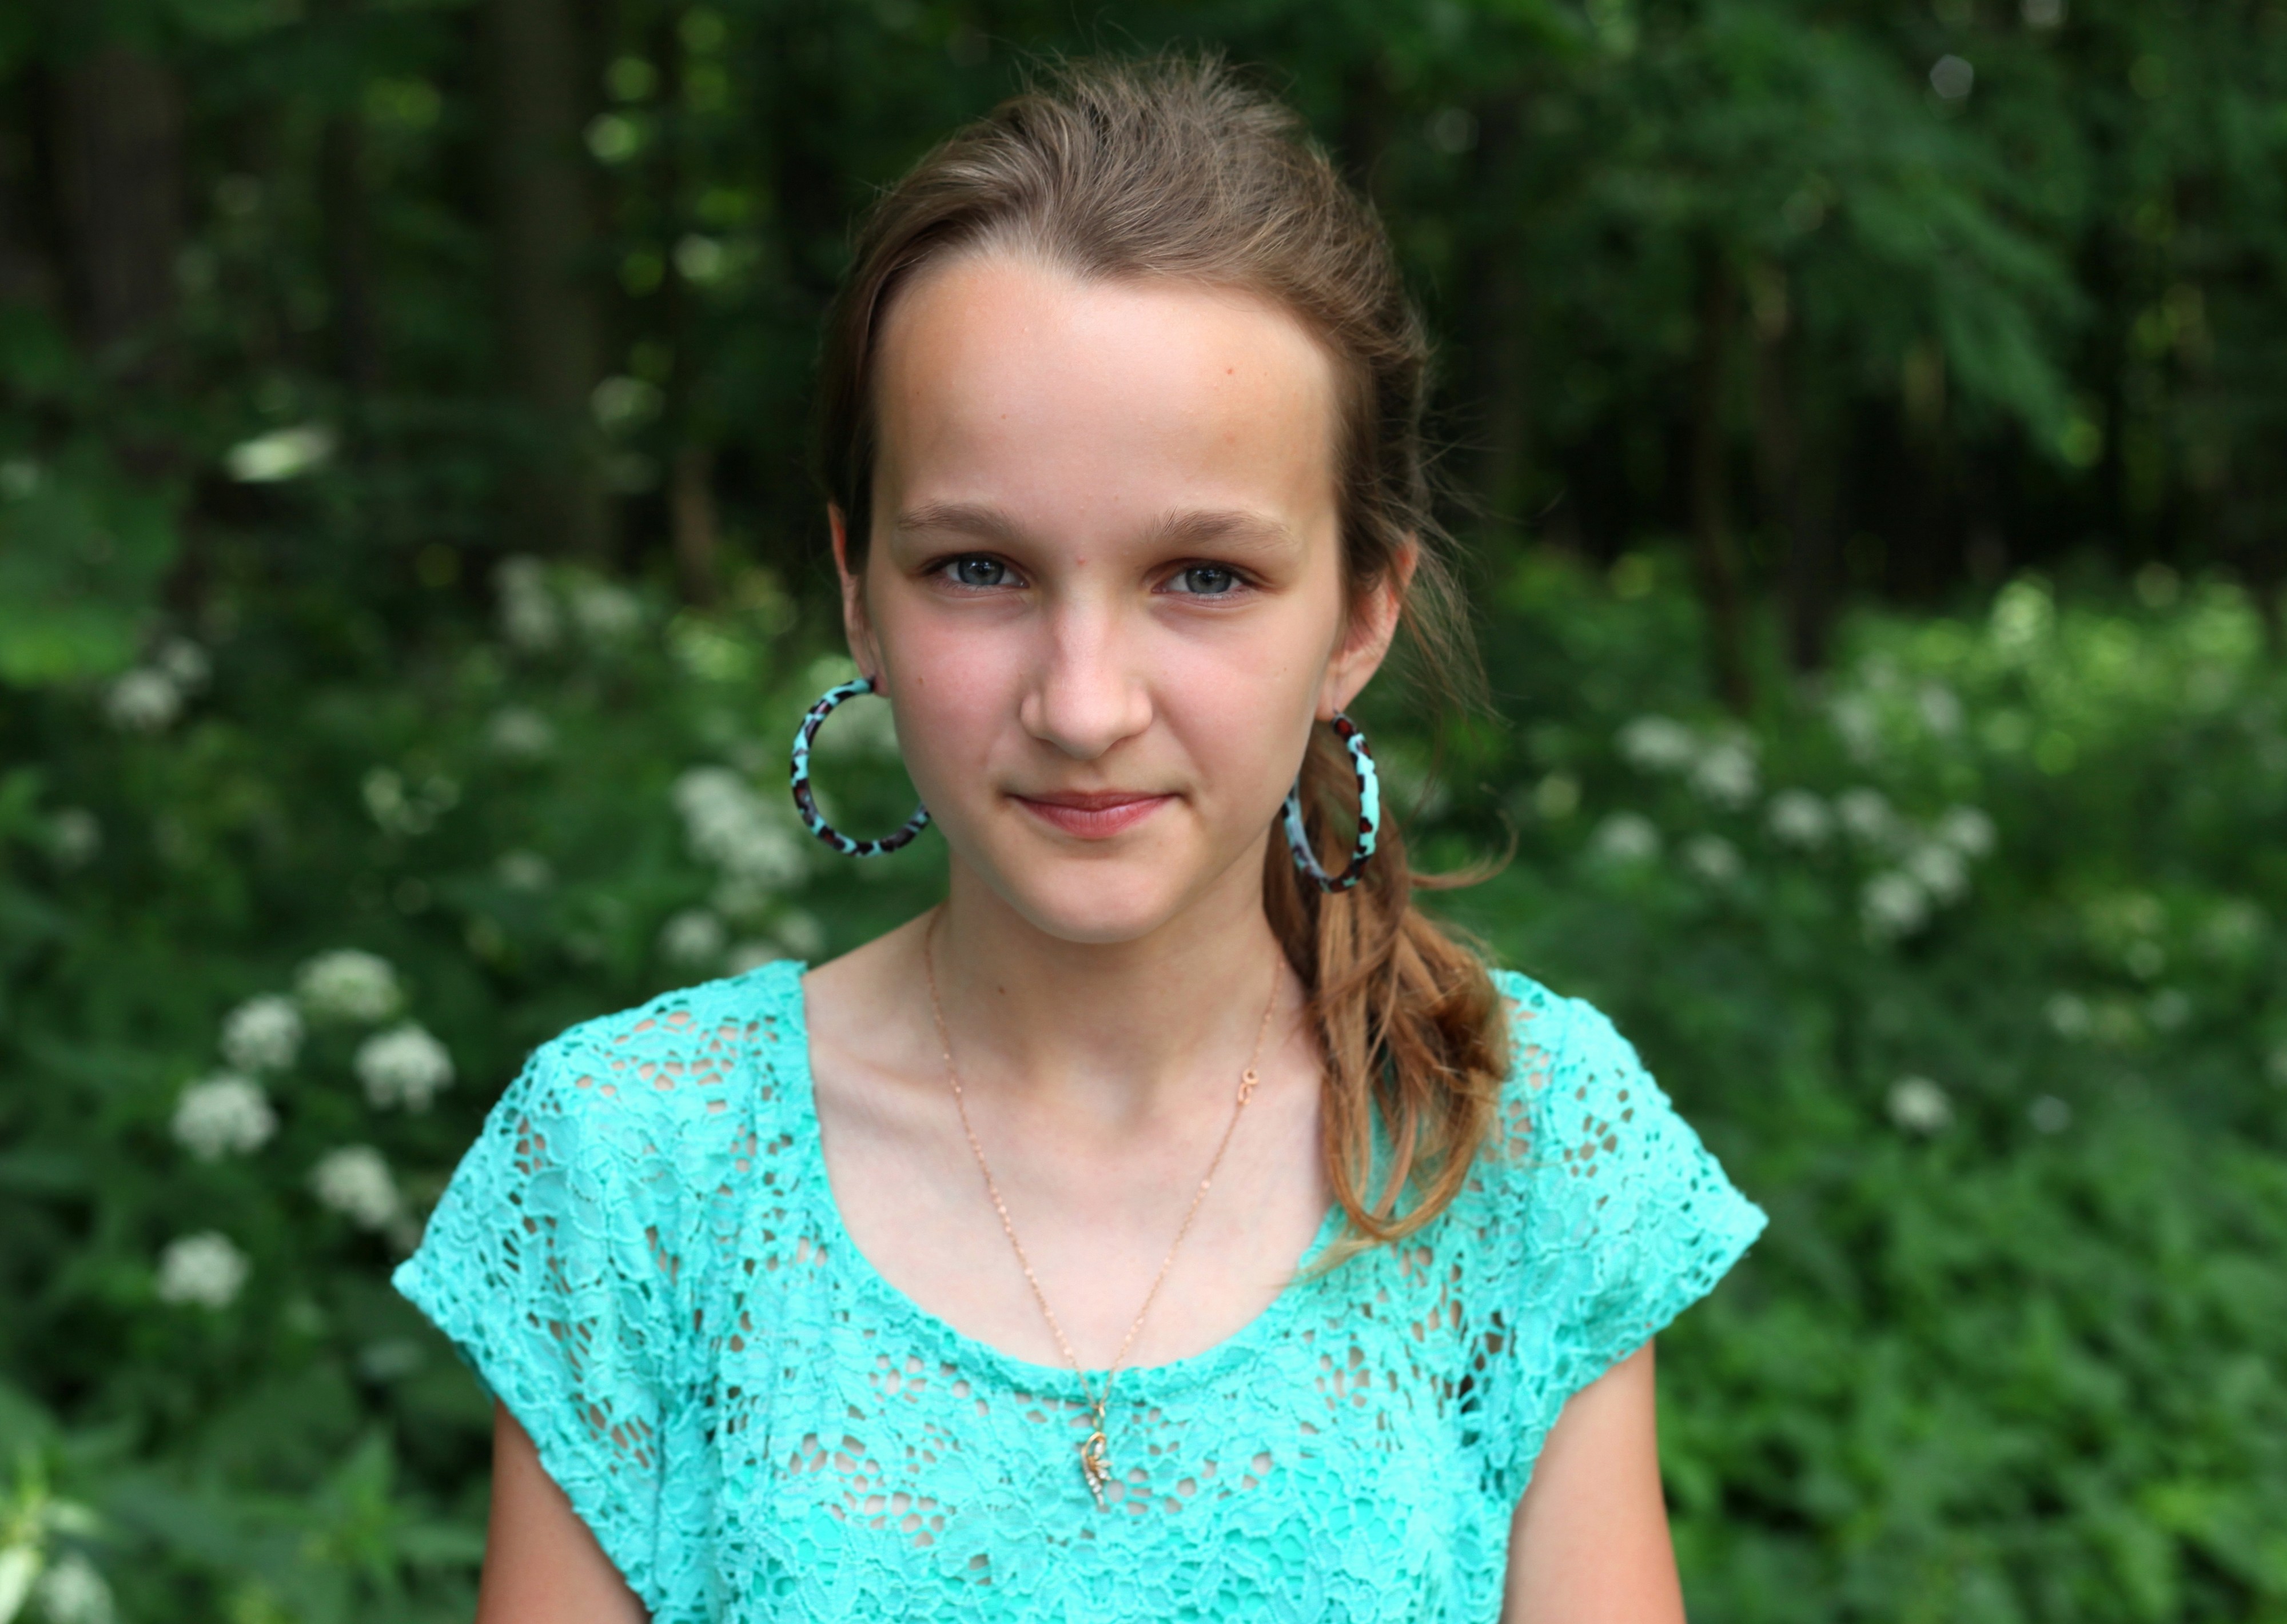 a pretty Catholic girl with huge earrings, photographed in June 2013, portrait 16/27